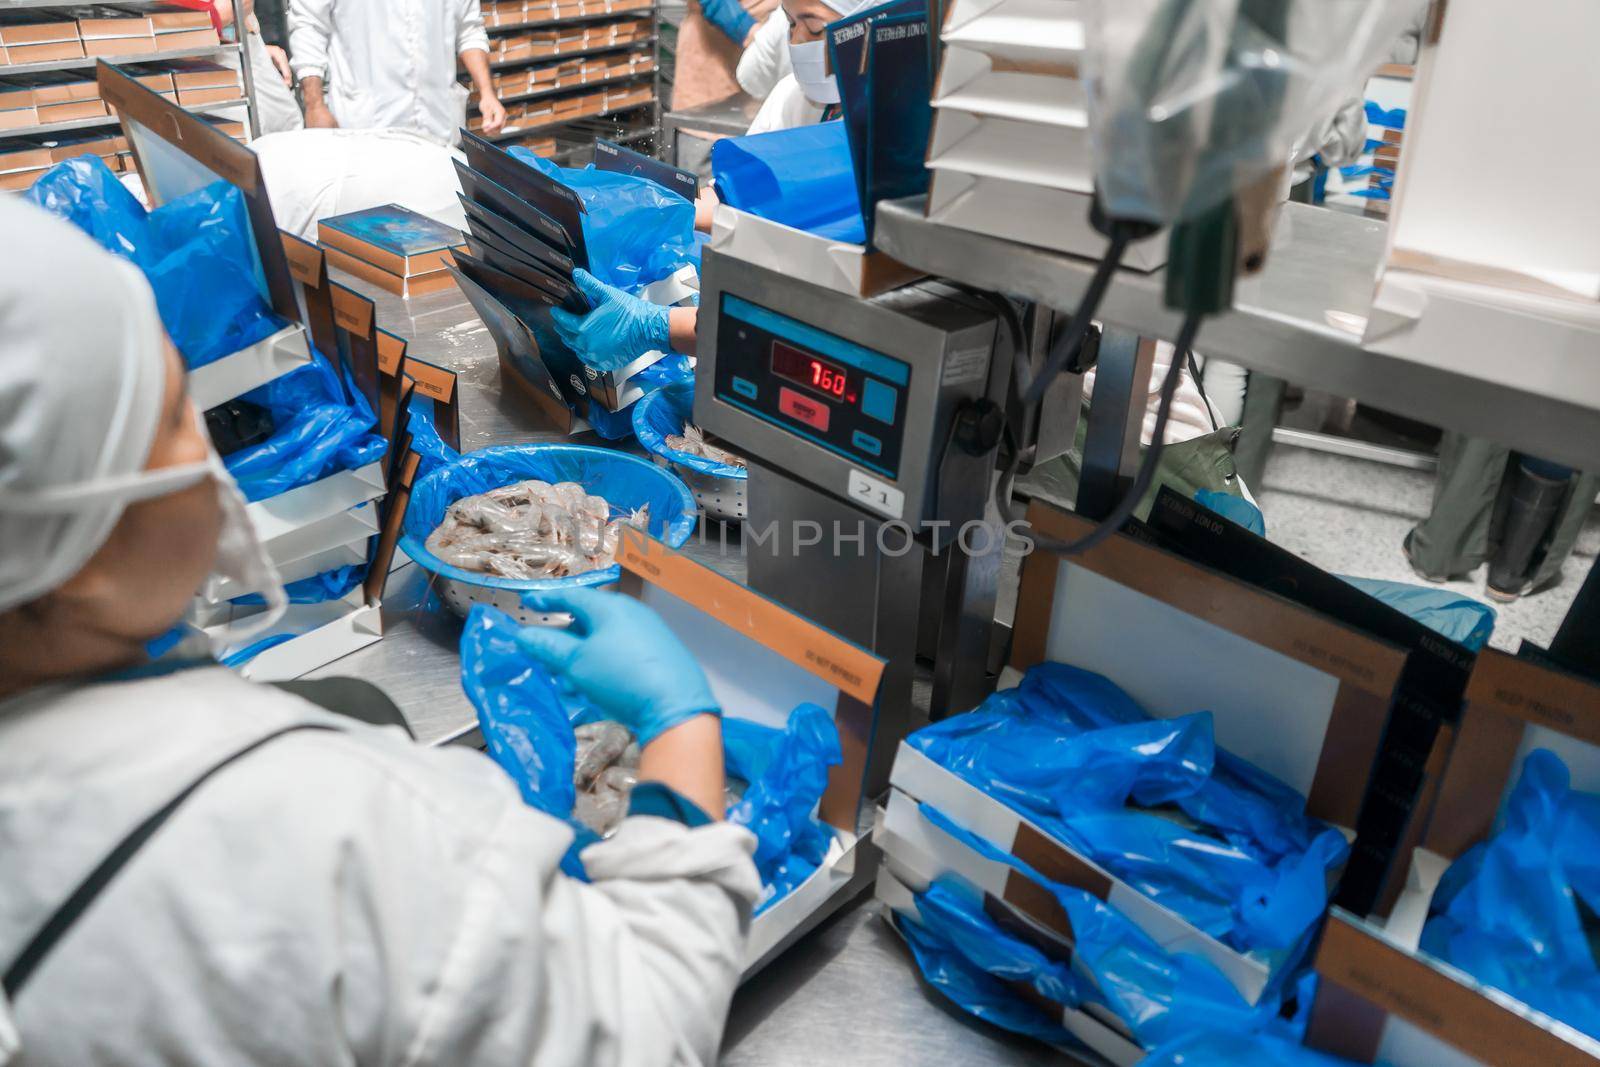 Weighing and packing of shrimp in an industrial food plant by cfalvarez